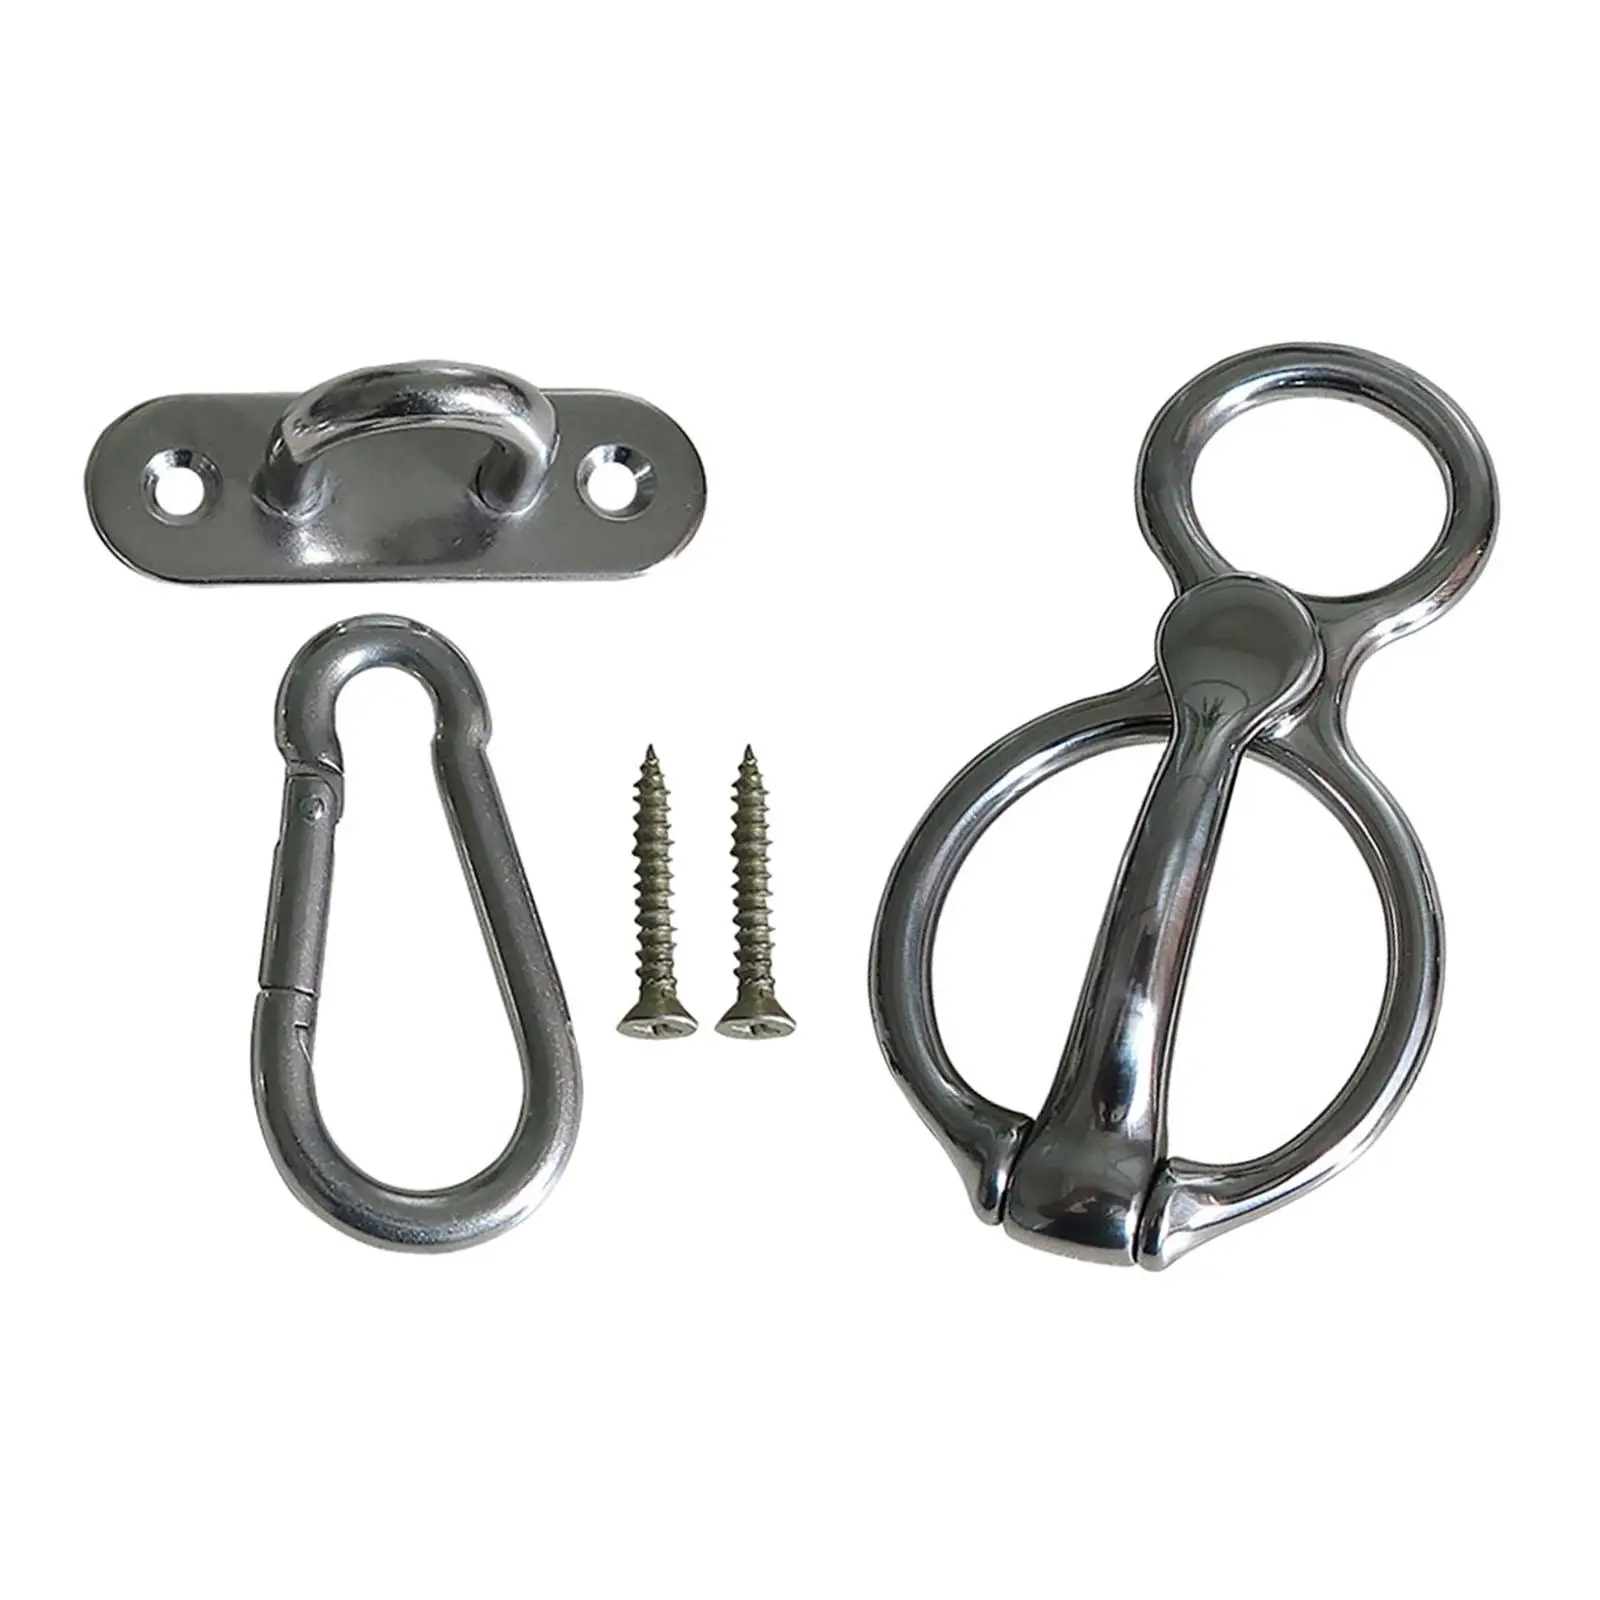 Horse Tie Ring Prevent Horses from Pulling Back Outdoor Sports Hooks Horse Tack Supplies Training Equipment Safety Accessories